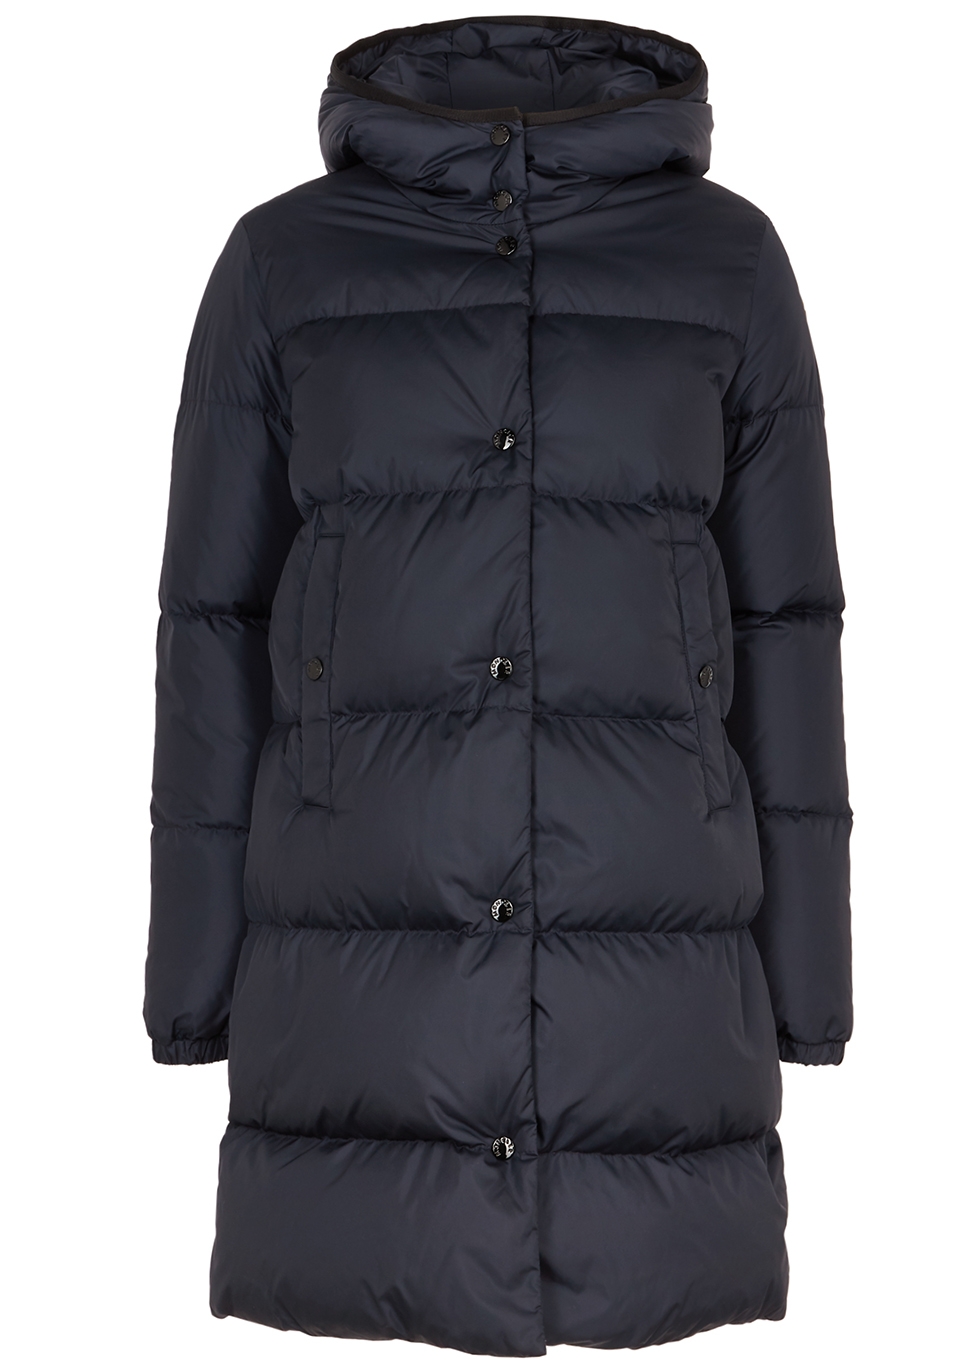 Moncler Burgaux navy quilted shell jacket - Harvey Nichols